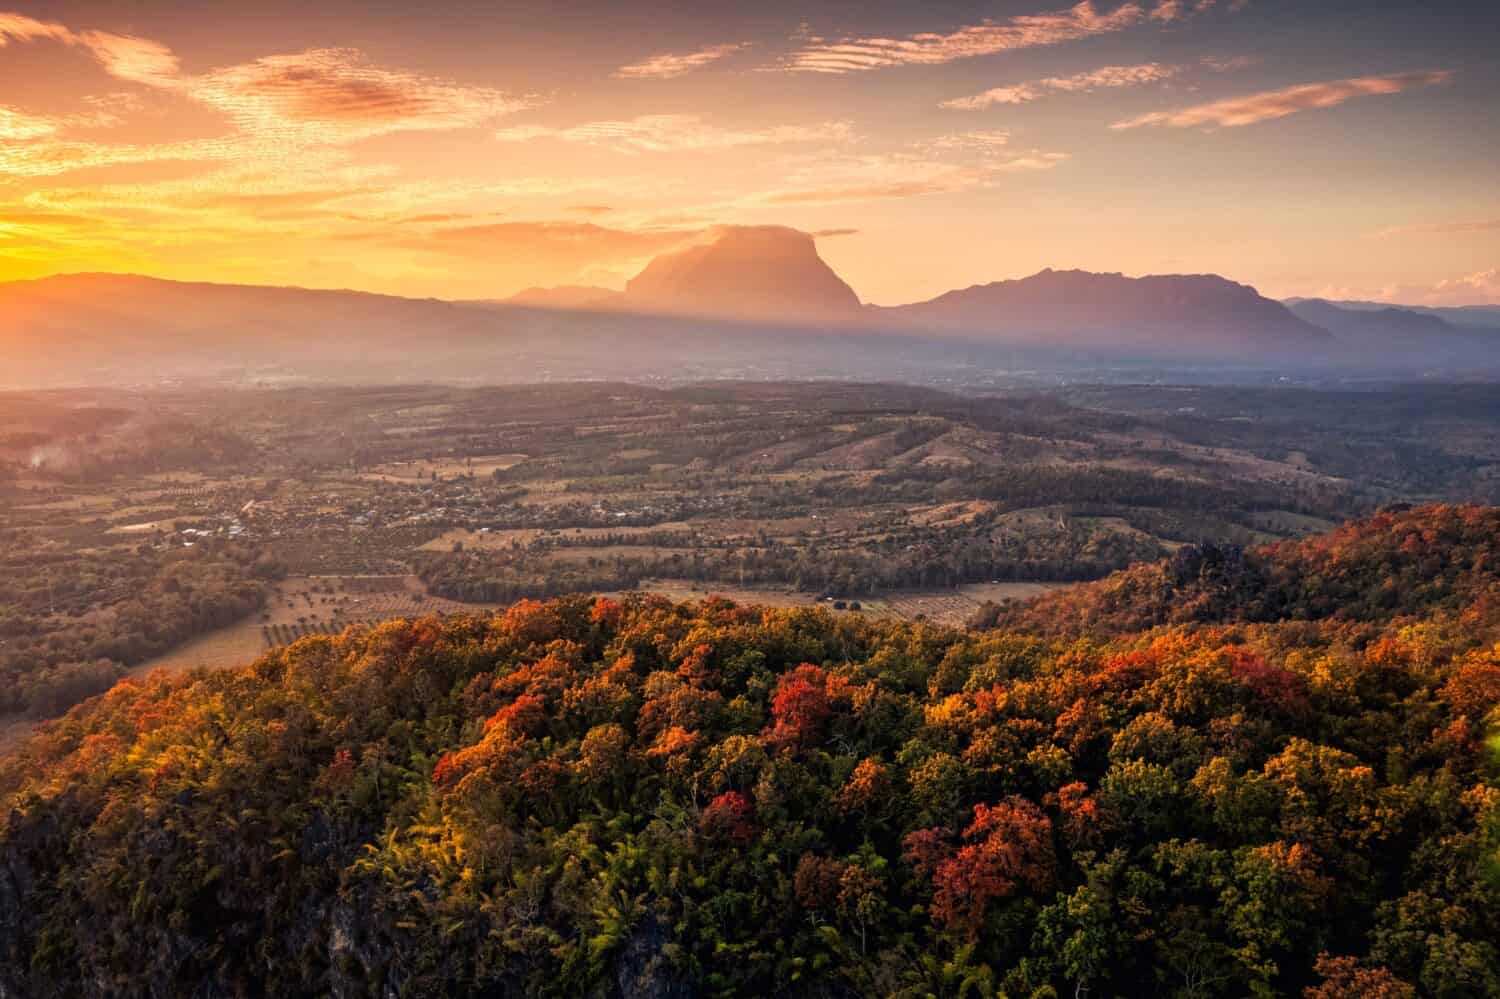 Aerial view of sunset over Doi Luang Chiang Dao mountain range with colorful autumn forest on hill in countryside at Chiang Dao, Chiang Mai, Thailand